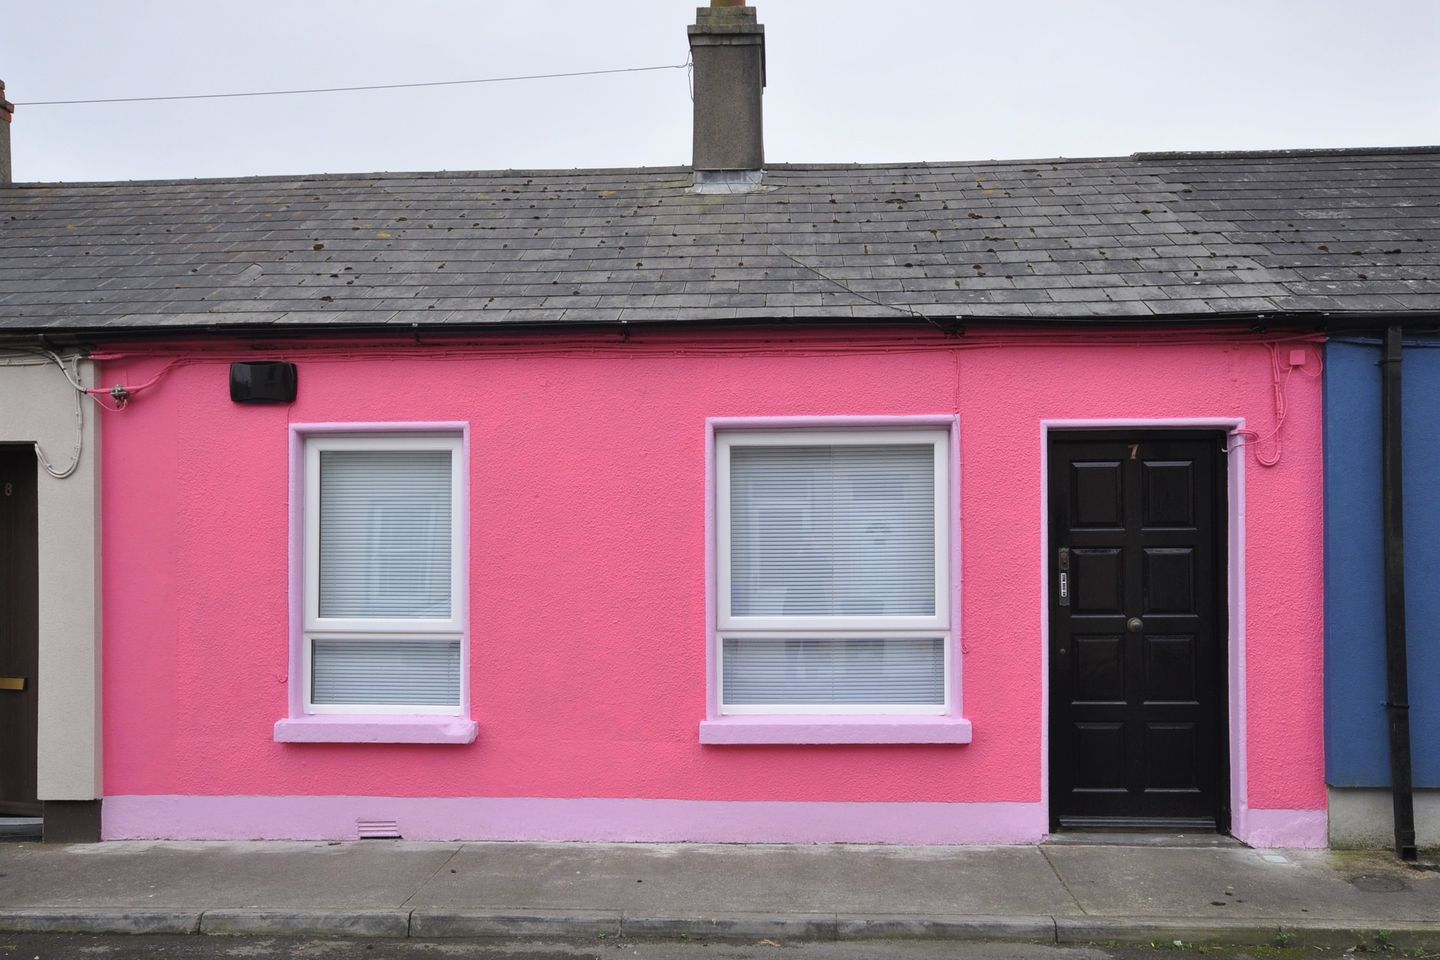 7 Monastery Street, Waterford City, Co. Waterford, X91VPK7